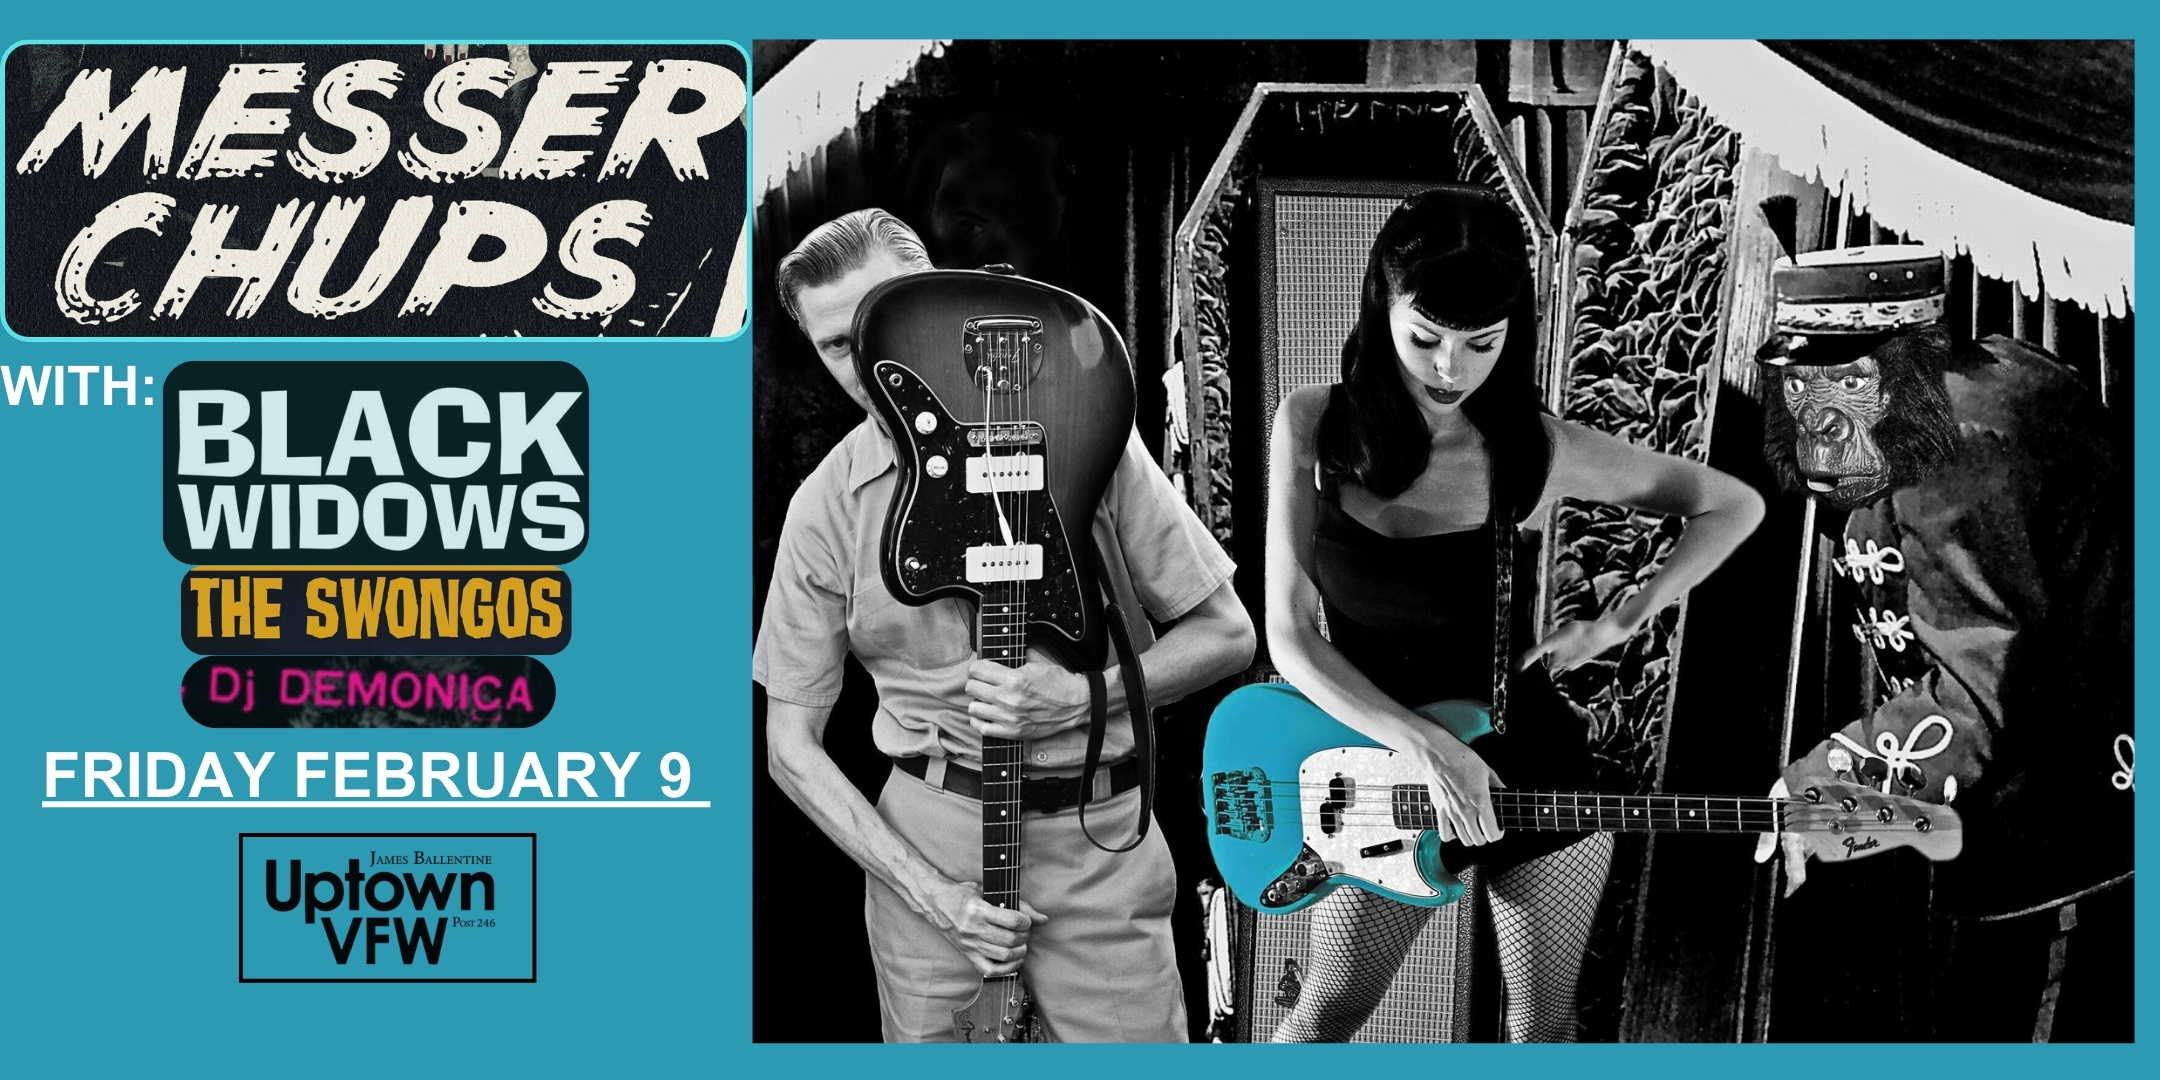 Messer Chups with Black Widows The Swongos Dj Demonica Friday, February 9 James Ballentine "Uptown" VFW Post 246 Doors 8:00pm :: Music 8:00pm :: 21+ GA $15 ADV / $20 DOS NO REFUNDS Ticket On-Sale Now